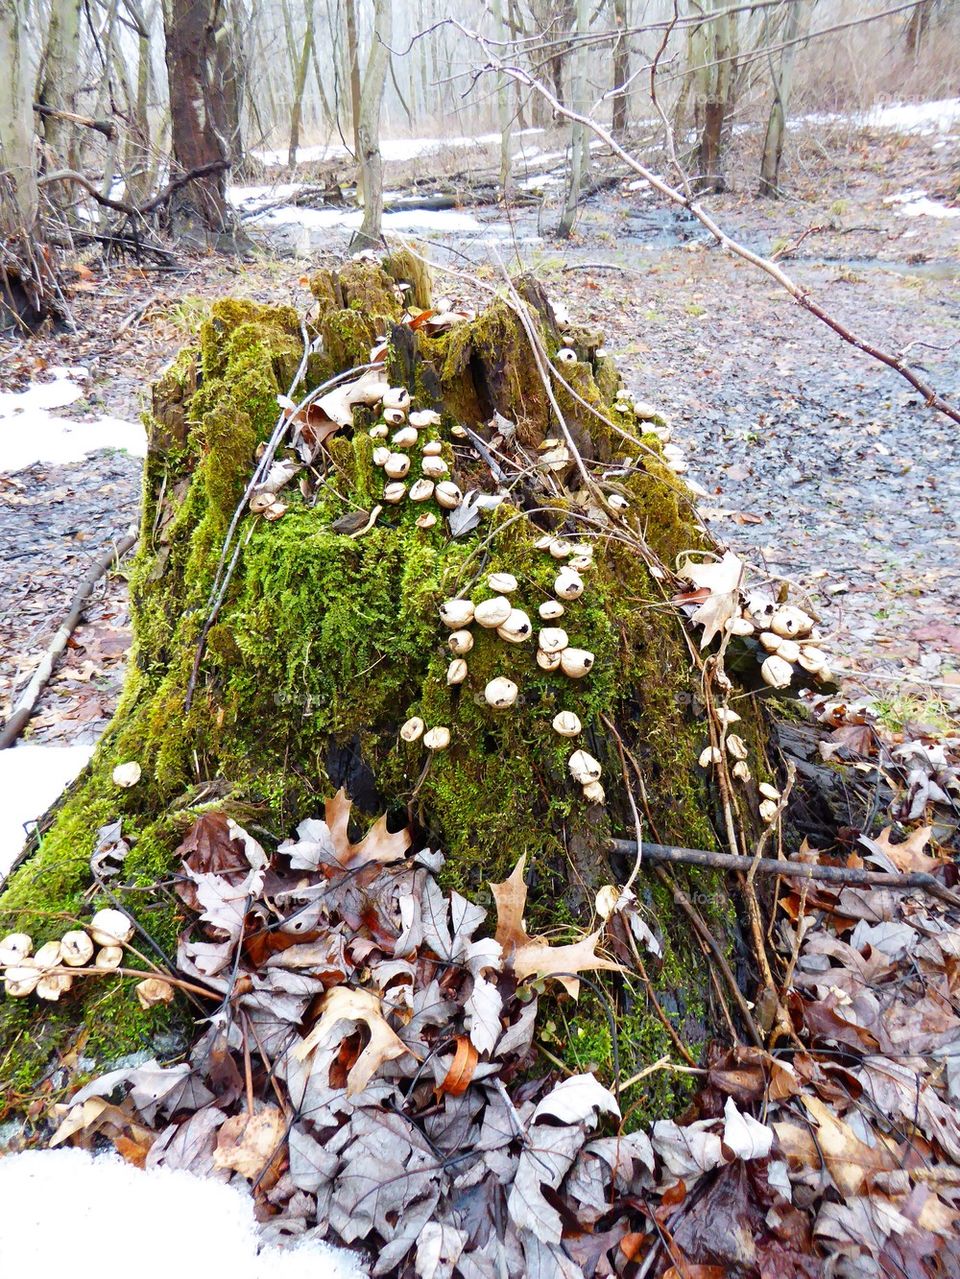 Winter stump coming back to life